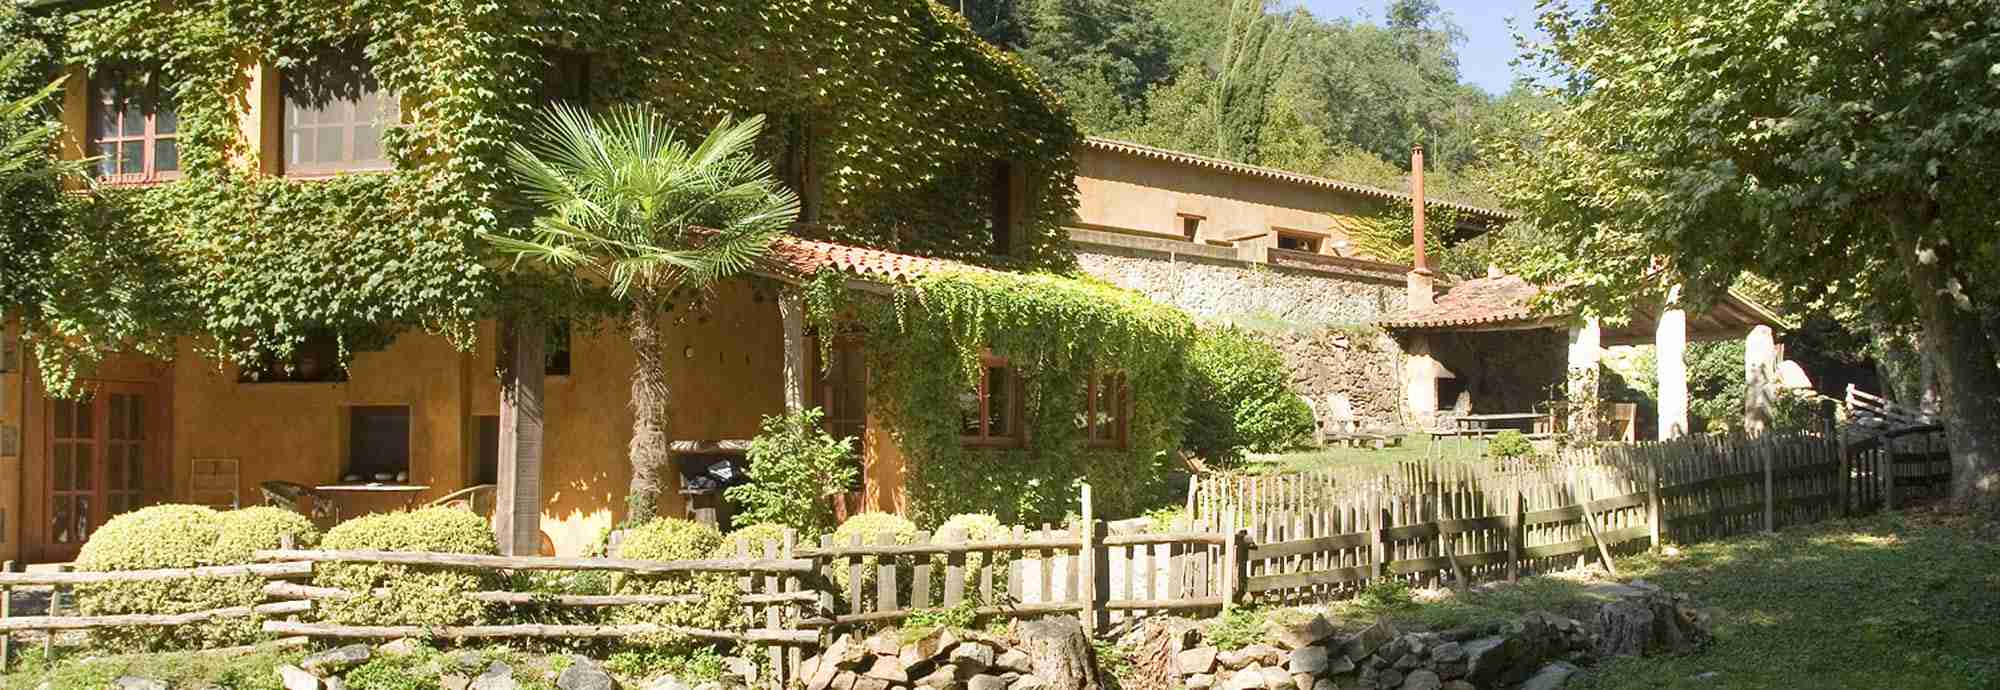 The real deal for Catalonia rural tourism at friendly organic farm